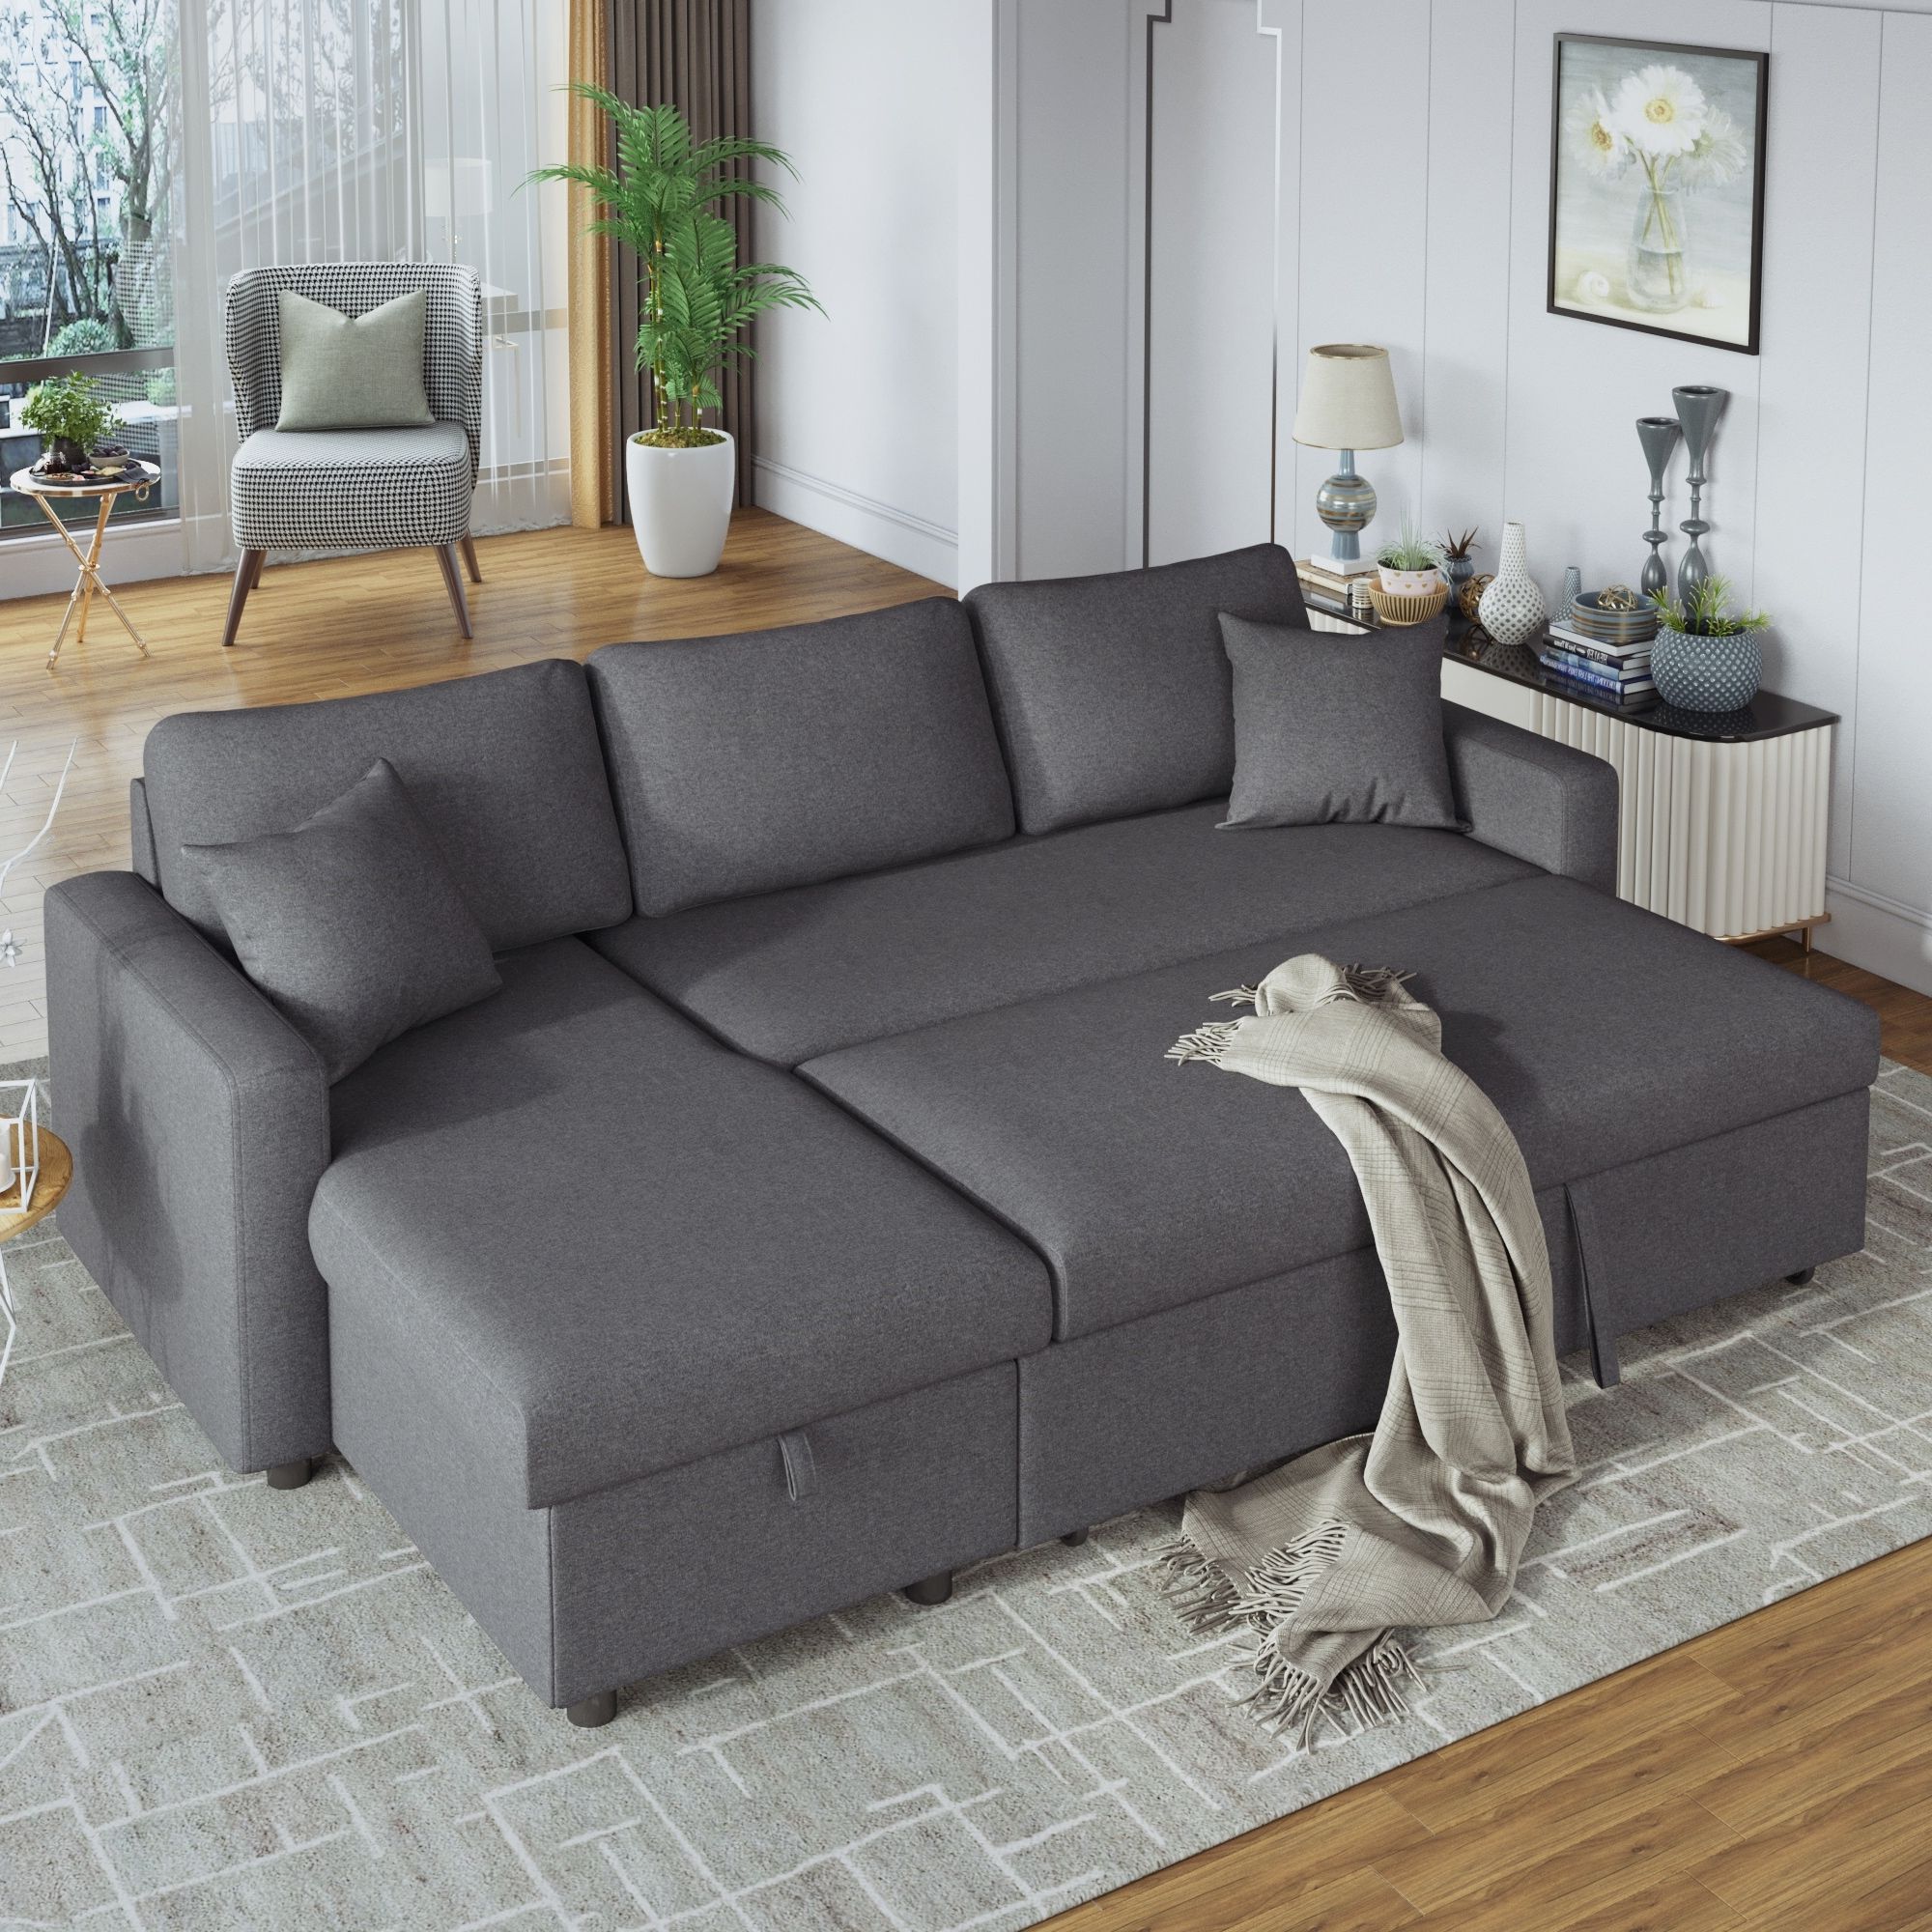 L Shape Sectional Sofa Modern Convertible Upholstered Twin Sofa Bed Sleeper  With Storage Sofa Chaise And 2 Tossing Cushions – – 36781665 Intended For U Shaped Sectional Sofa With Pull Out Bed (View 17 of 20)